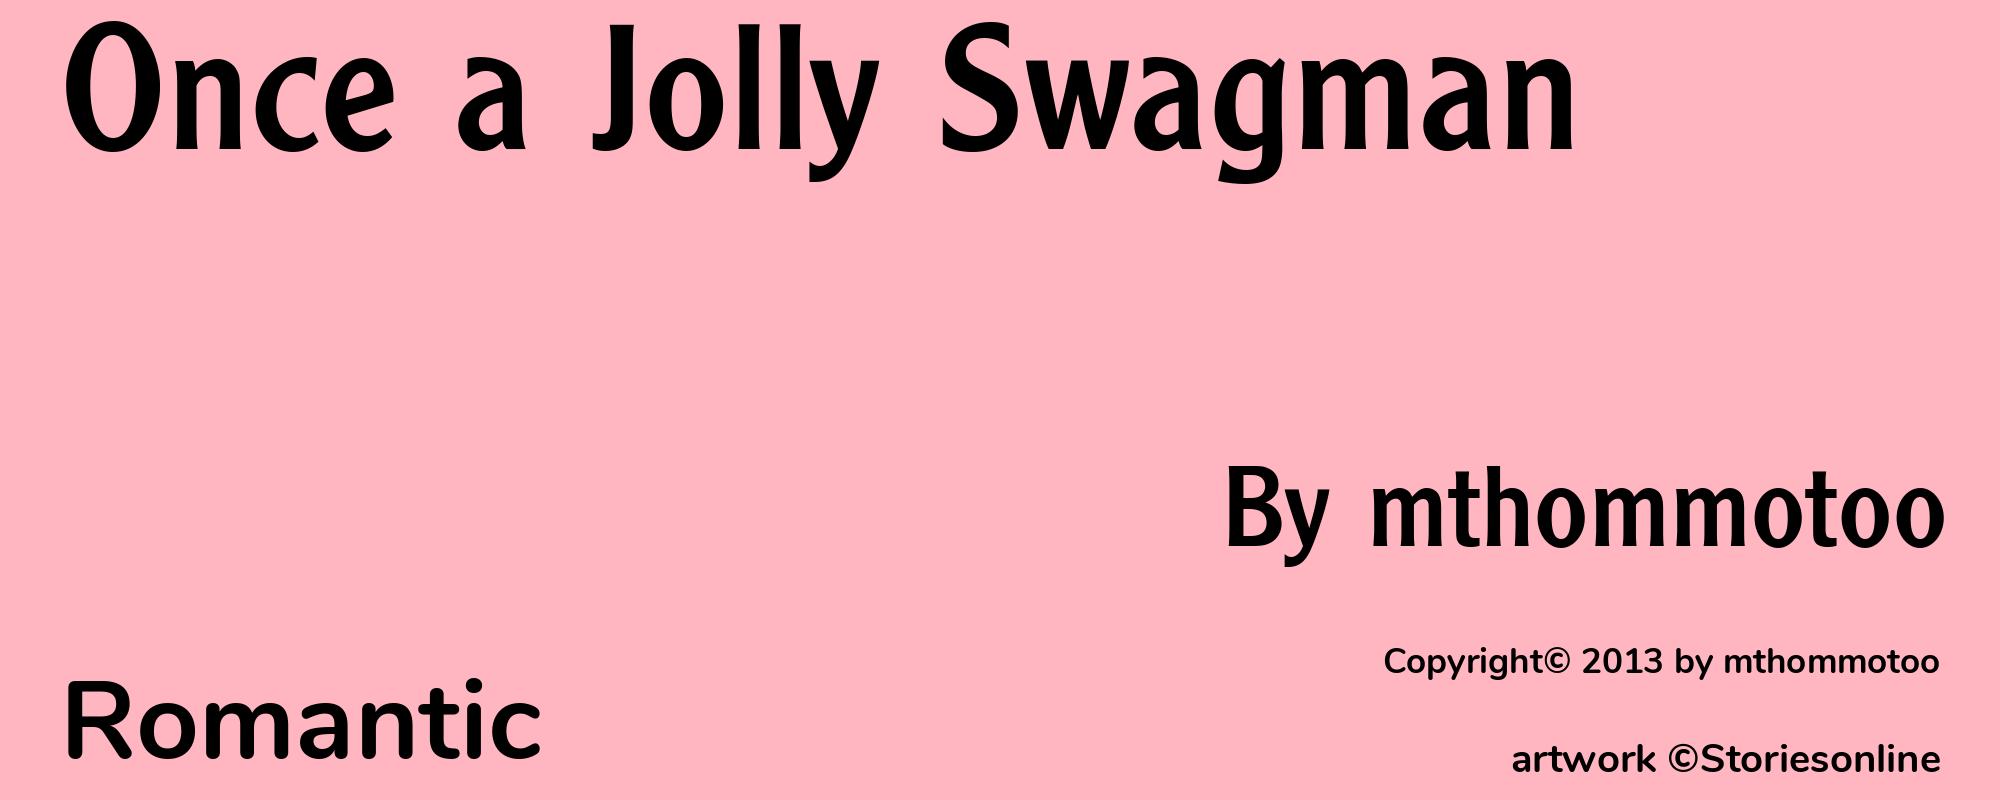 Once a Jolly Swagman - Cover